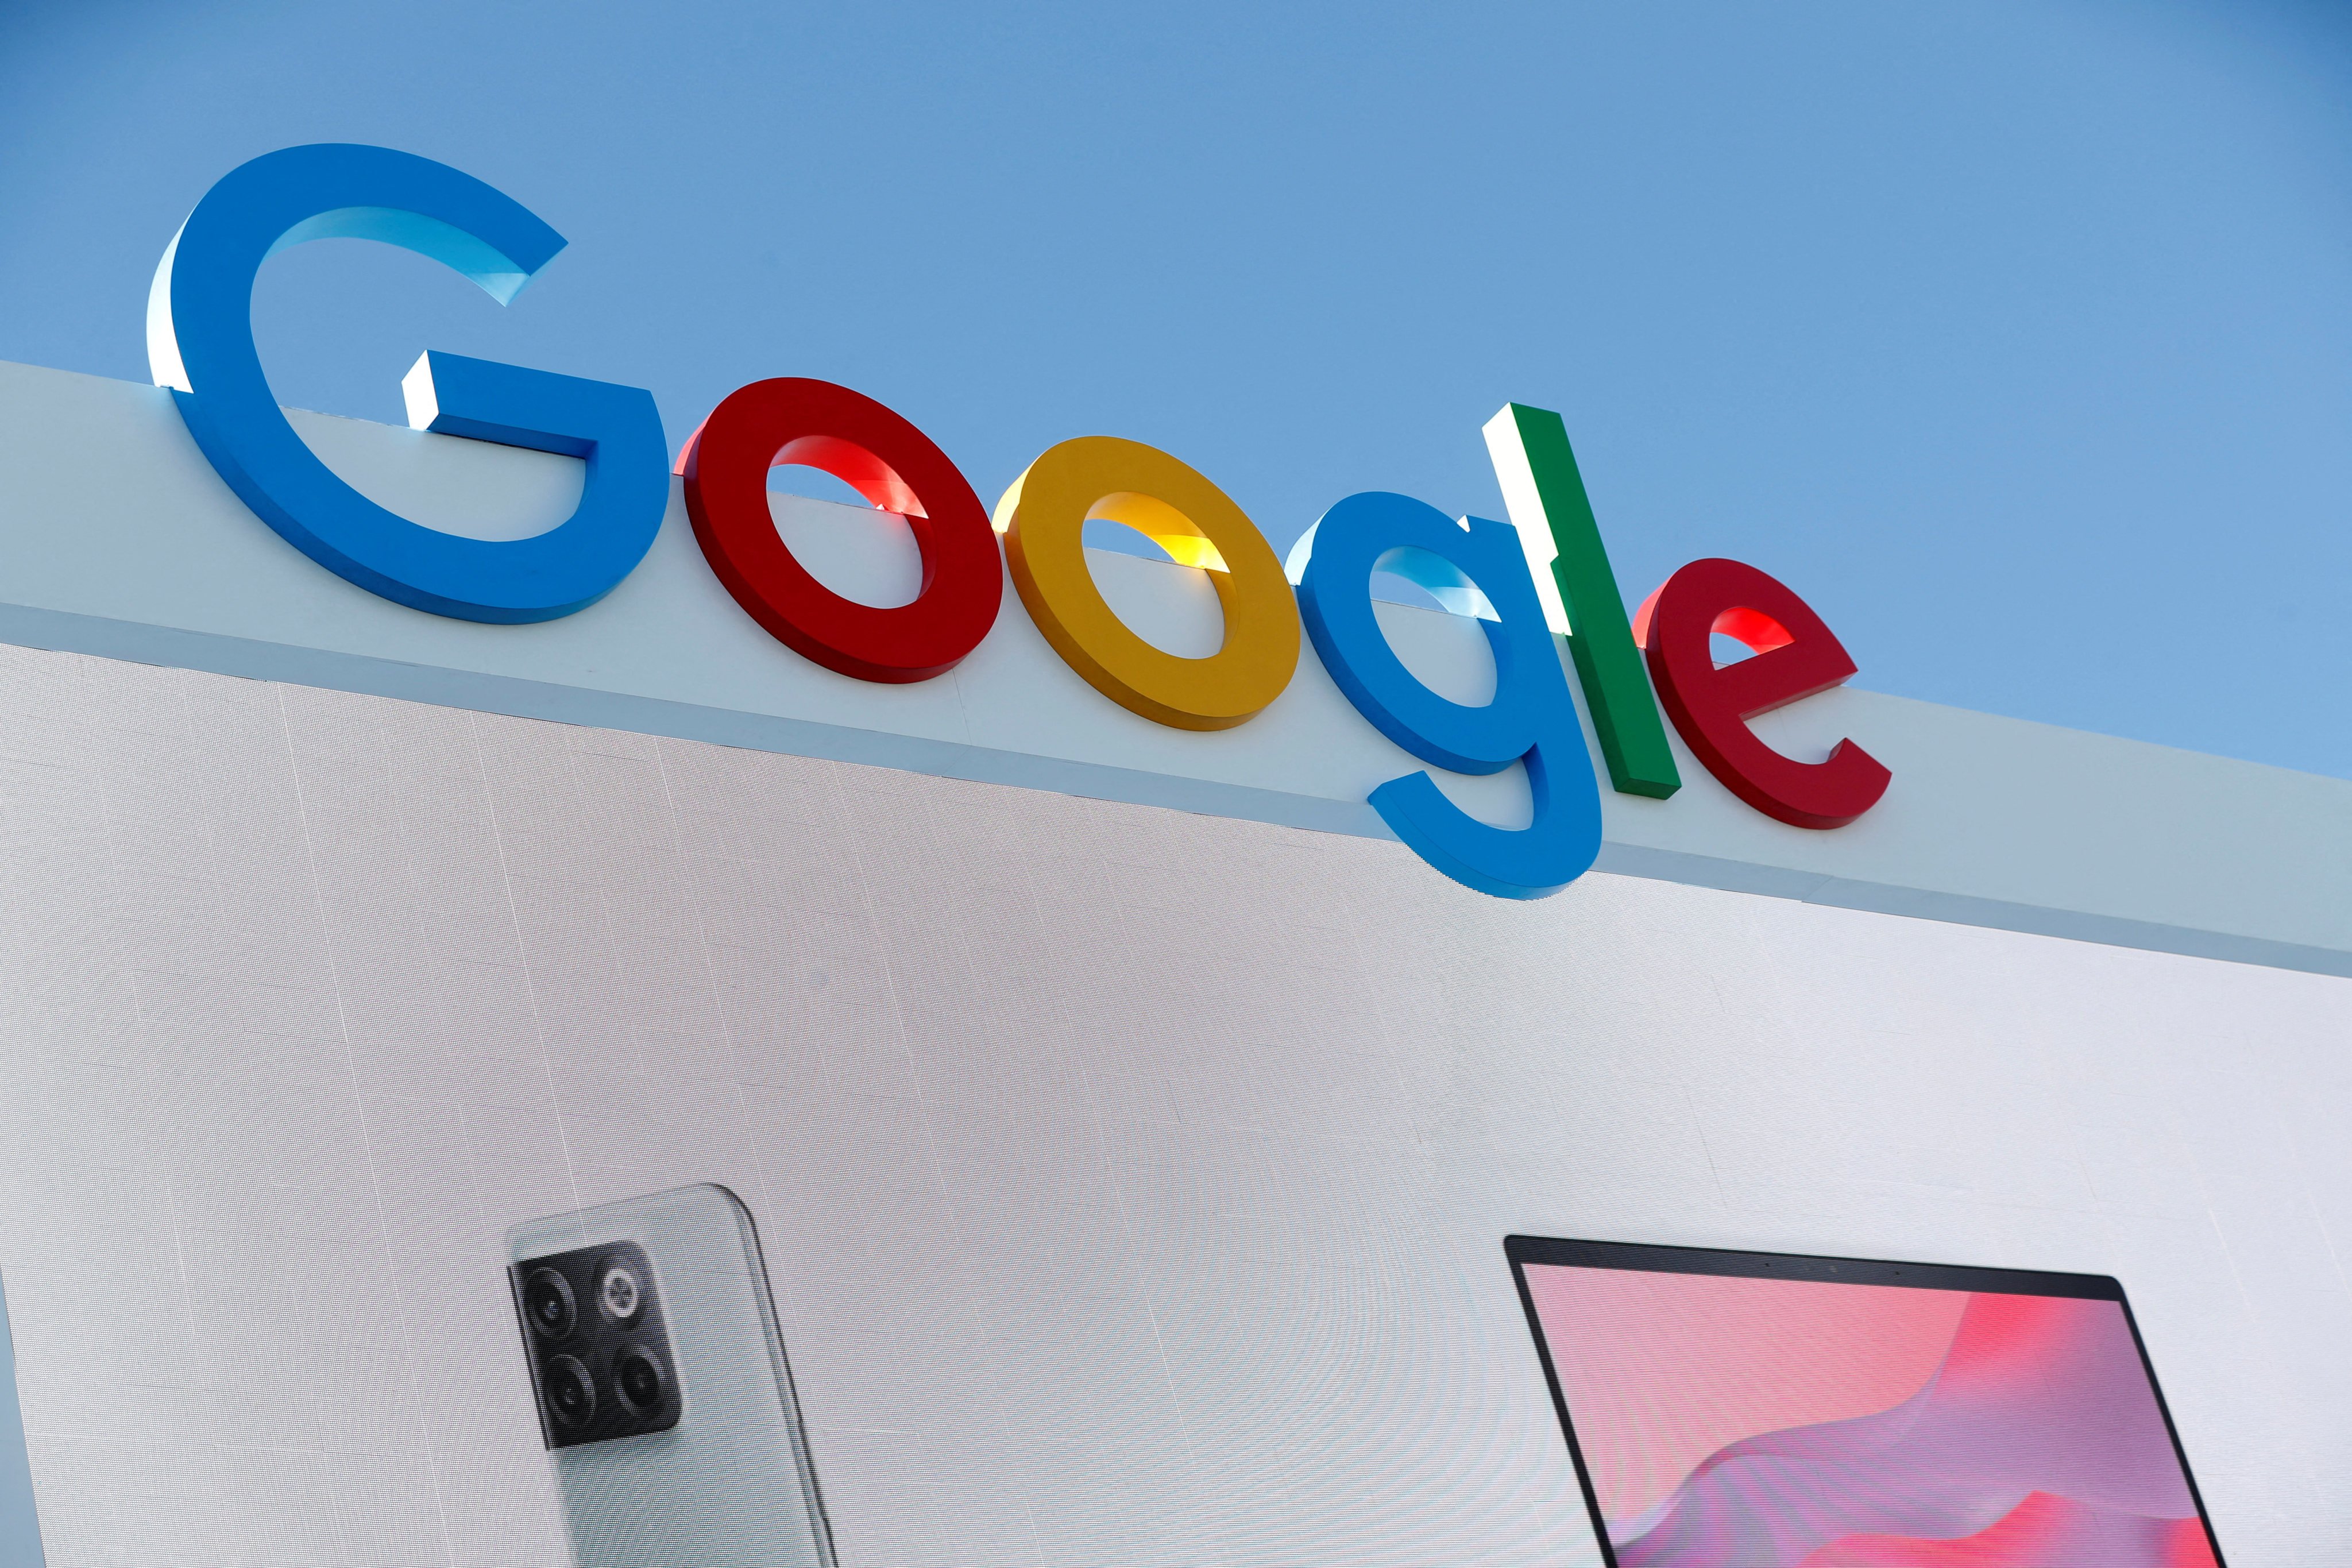 Google will provide Chromebooks and tech training to teachers in Mongolia as part of a new partnership. Photo: Reuters